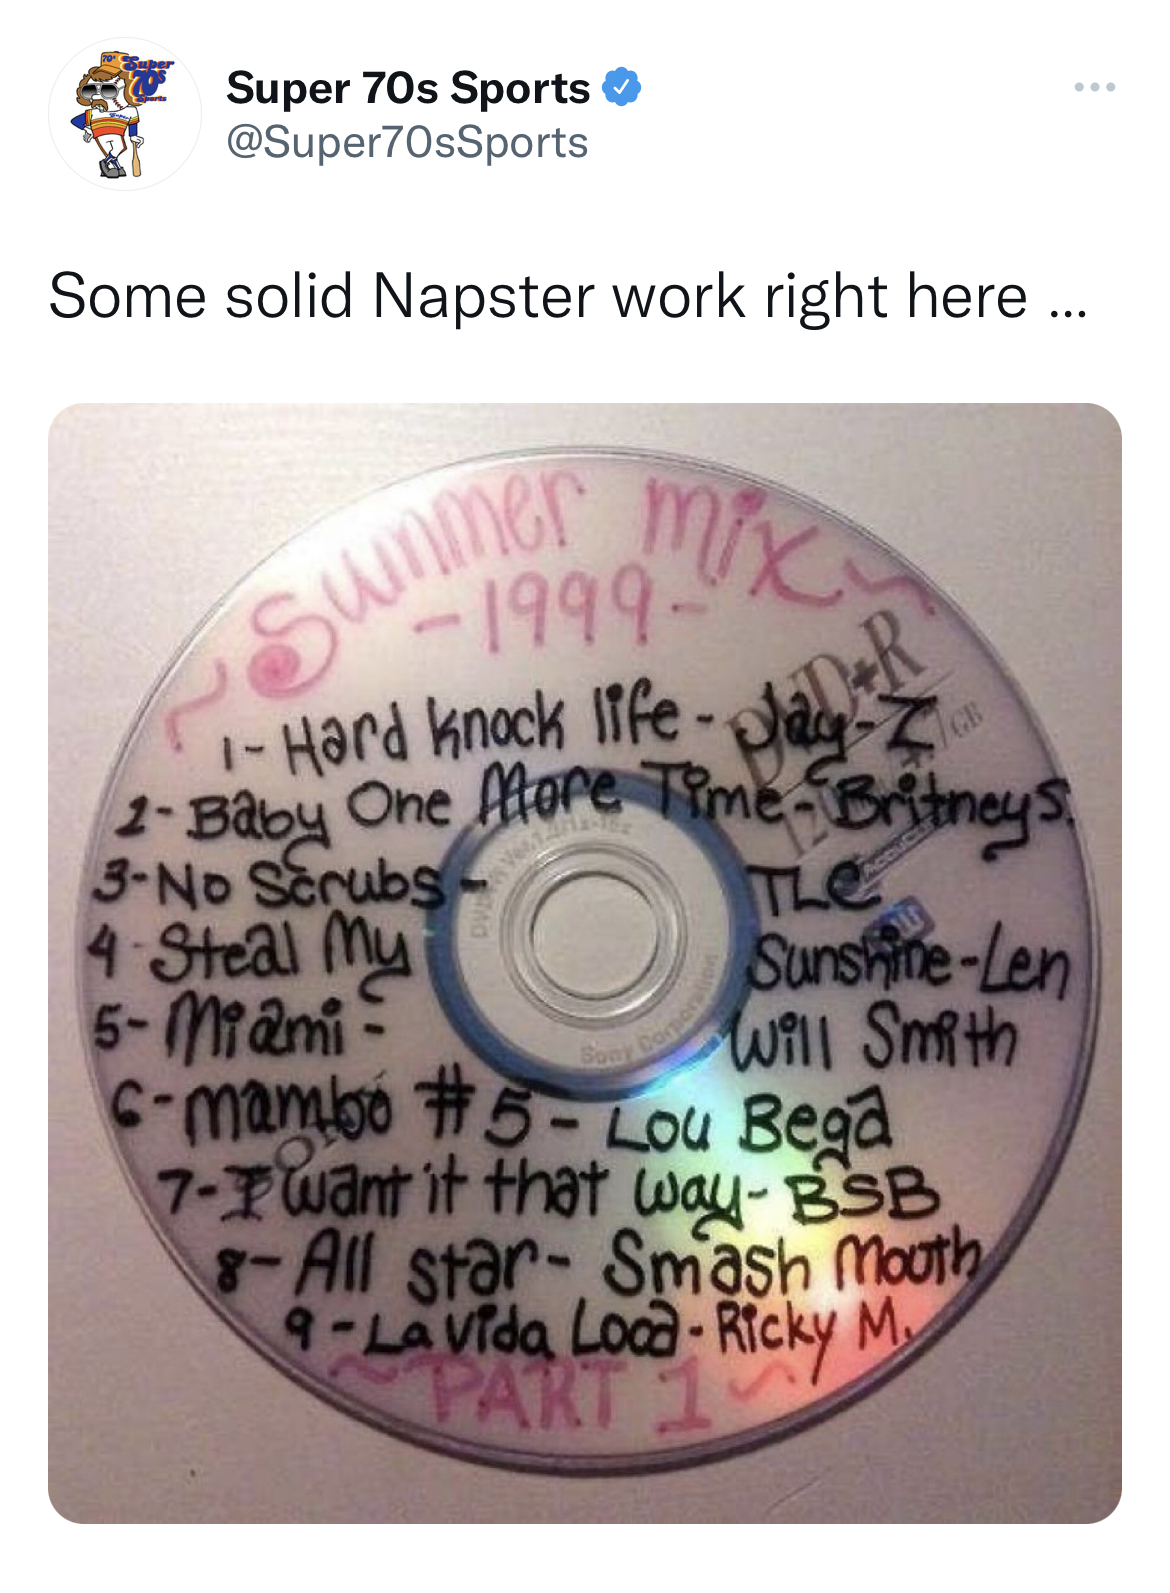 funny tweets - compact disc - Super 70s Sports Some solid Napster work right here... mix 1Hard knock life 2Baby One More TimeBritneys Pdr Tle 3No Scrubs 4 Steal My 5Miami 1999 Summer 168 SunshineLen Will Smith 6mambo Bega 7want it that way Bsb 8All star S